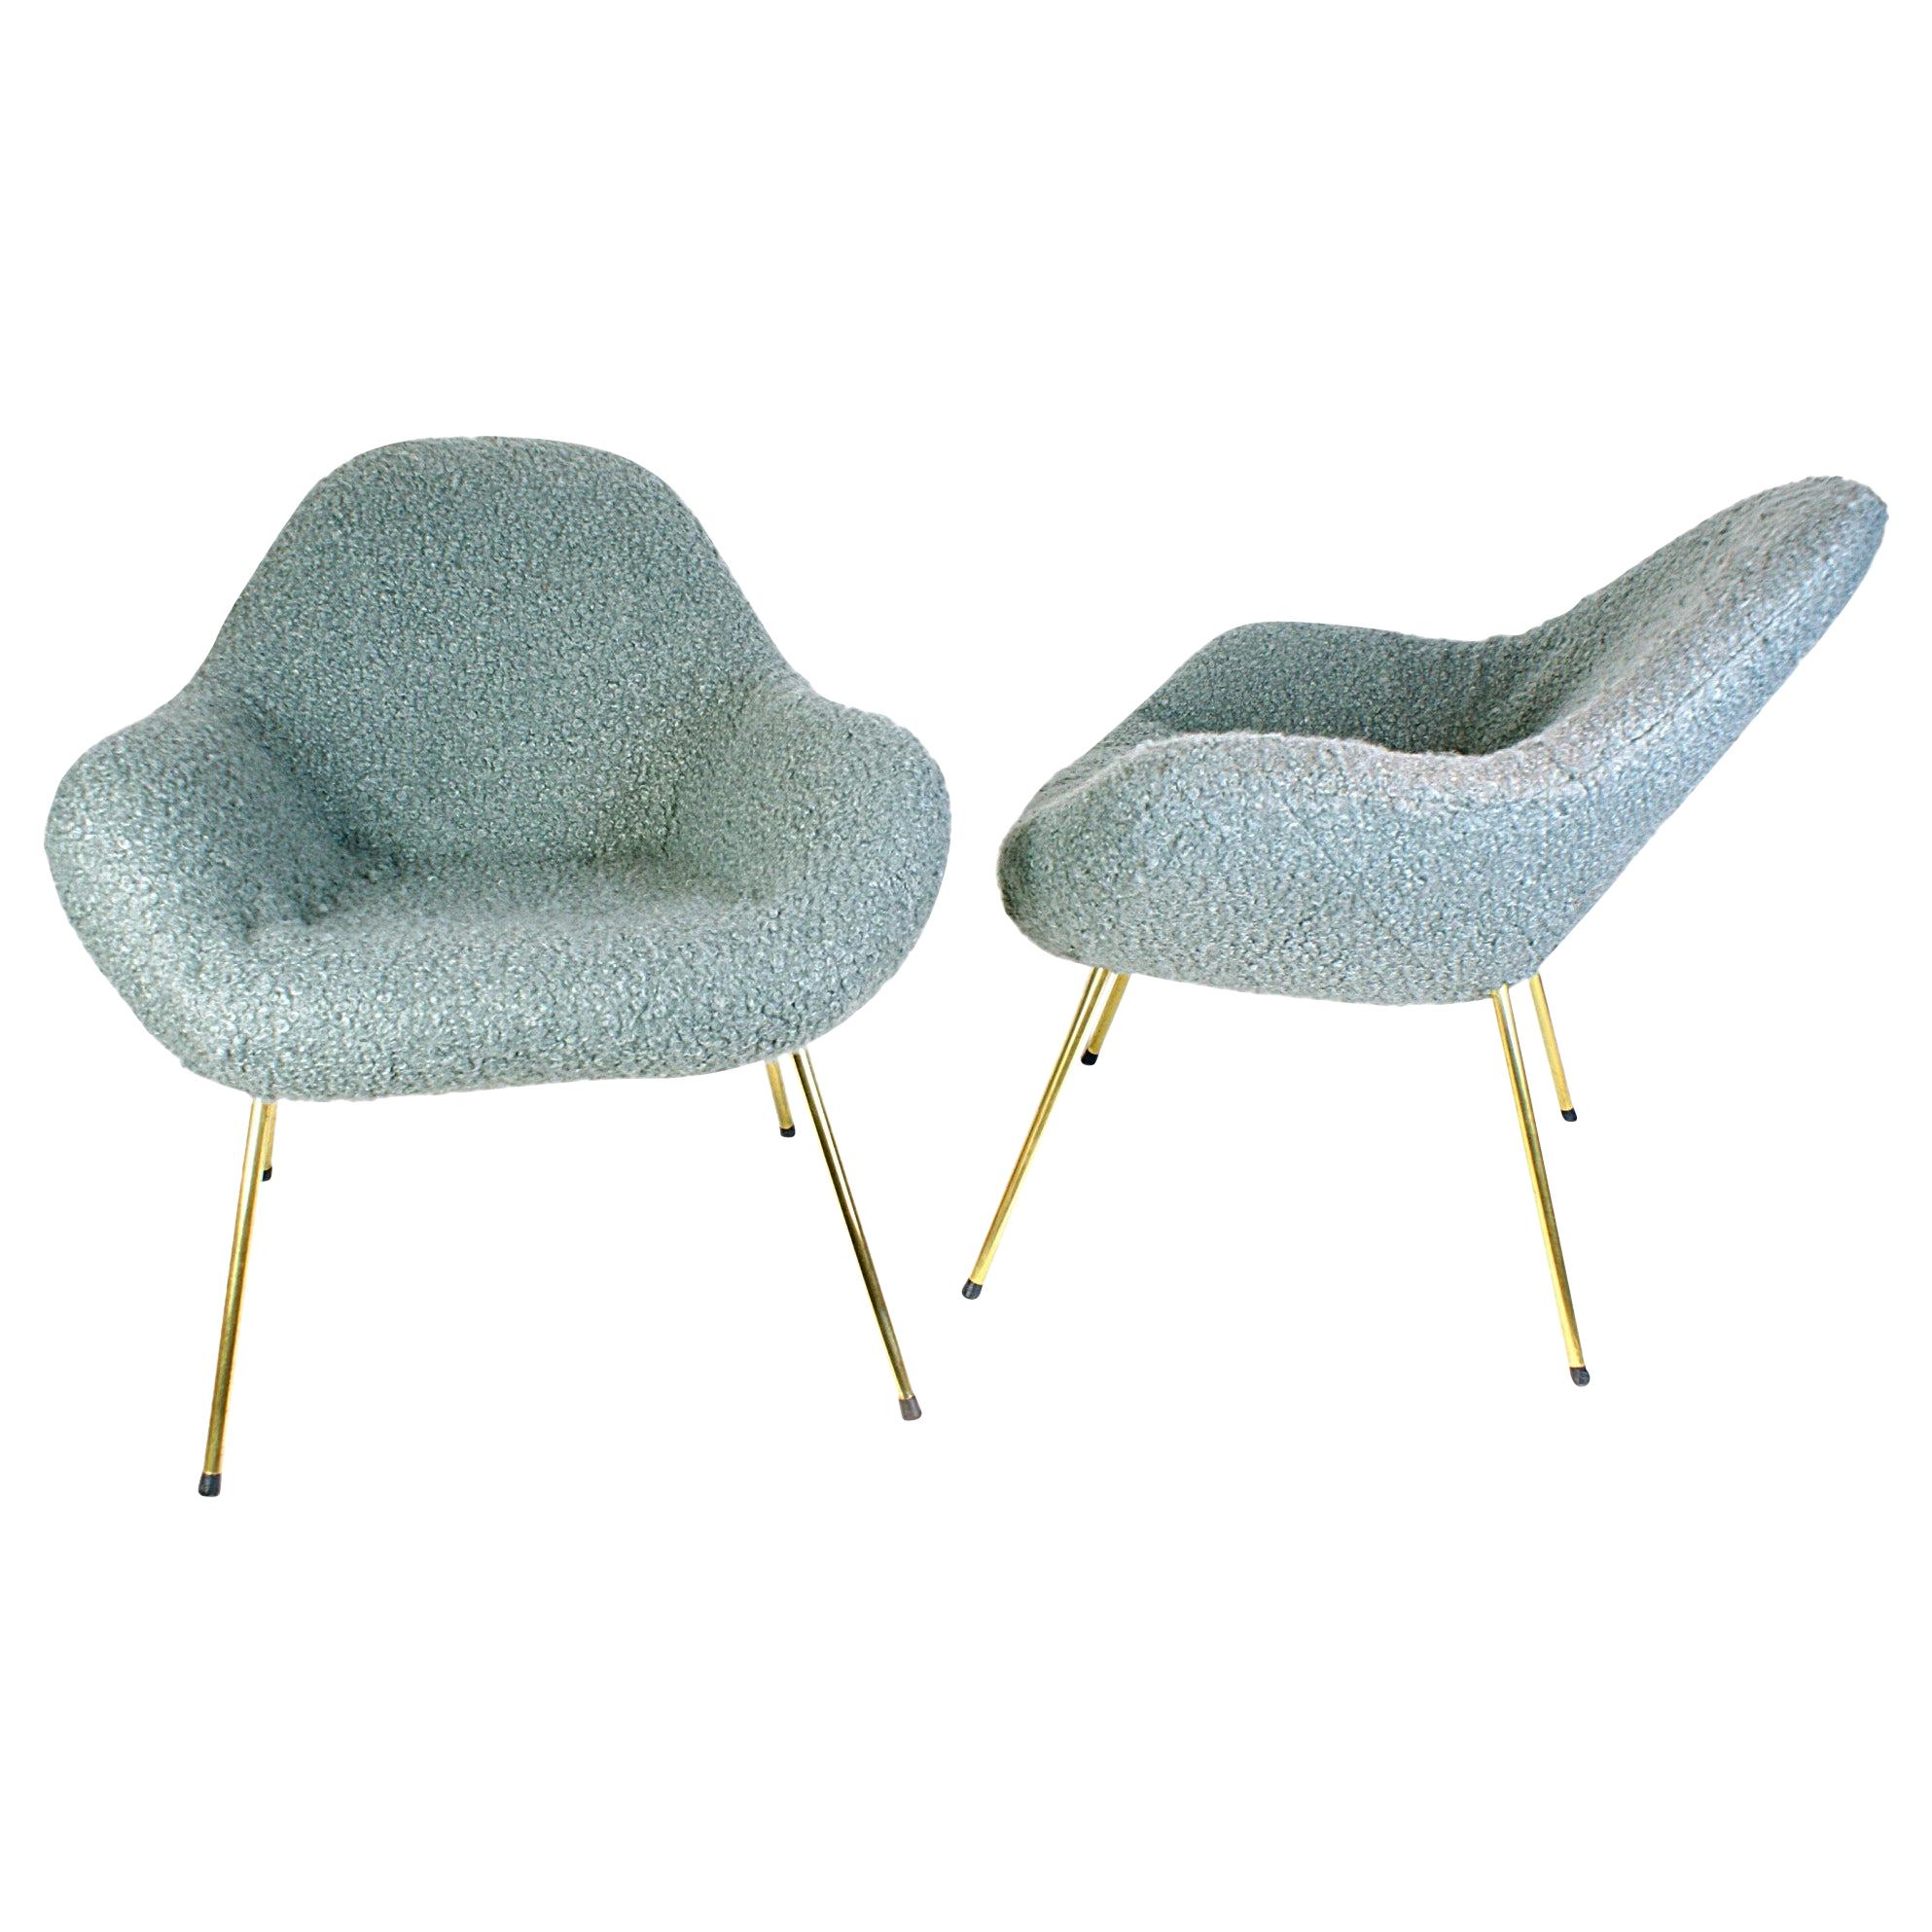 Timeless 1960s ball lounge chairs, designed by Fritz Neth. The chairs have been freshly restored by our upholstery. New foam and high-quality sheep wool mix fabric in light grey, beautifully contrasting with the brass legs. Very good general